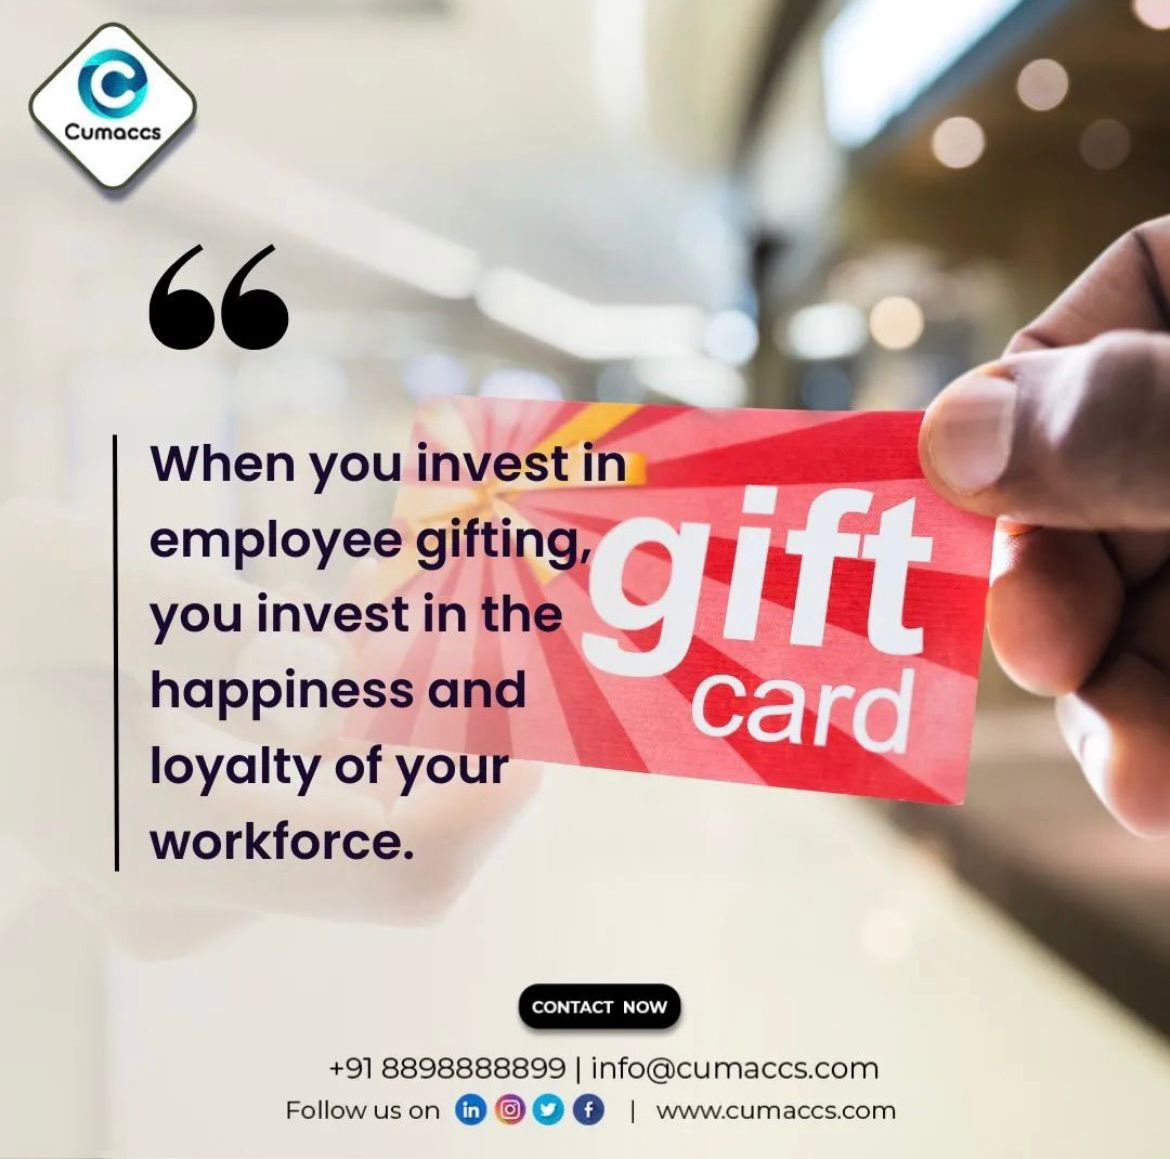 Embrace the Value of Employee Gifting: Elevate workforce happiness and loyalty through thoughtful investments in appreciation.

For corporate orders:
Mail us at: info@cumaccs.com

#CorporateGifting #employeebenefits #businessdevelopment #motivation  #management